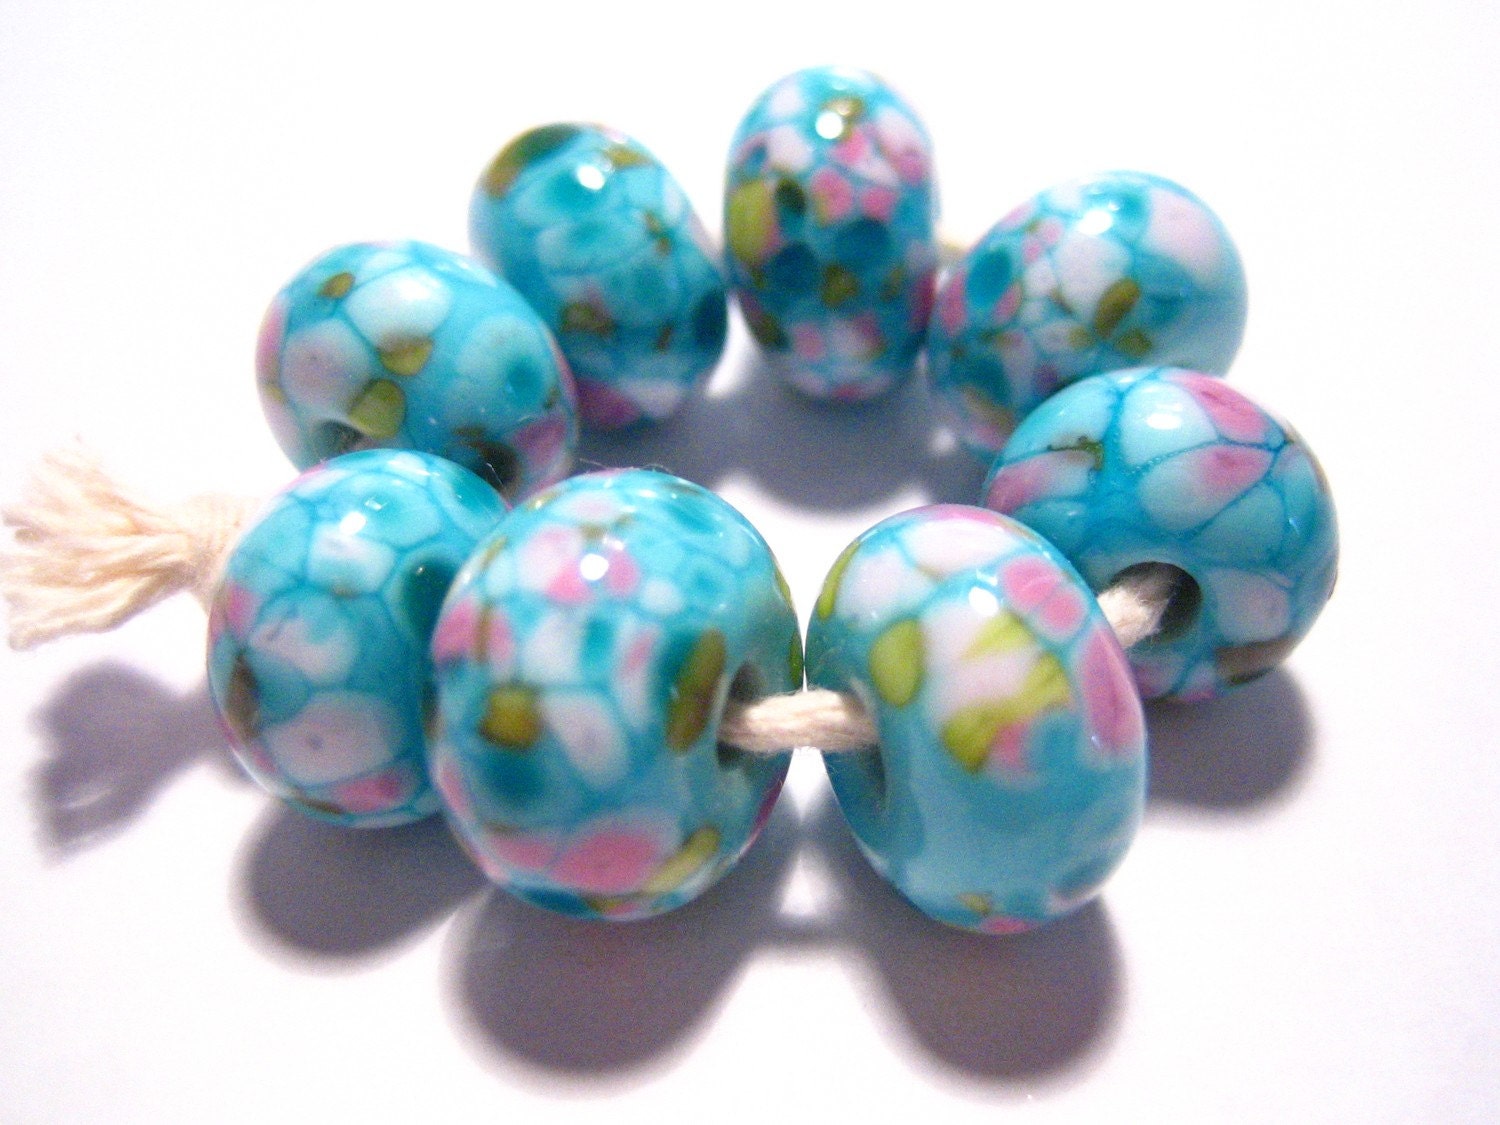 8 really pretty and shamelessly girly beads made by me, Rachel B, in my home studio in Cornwall.